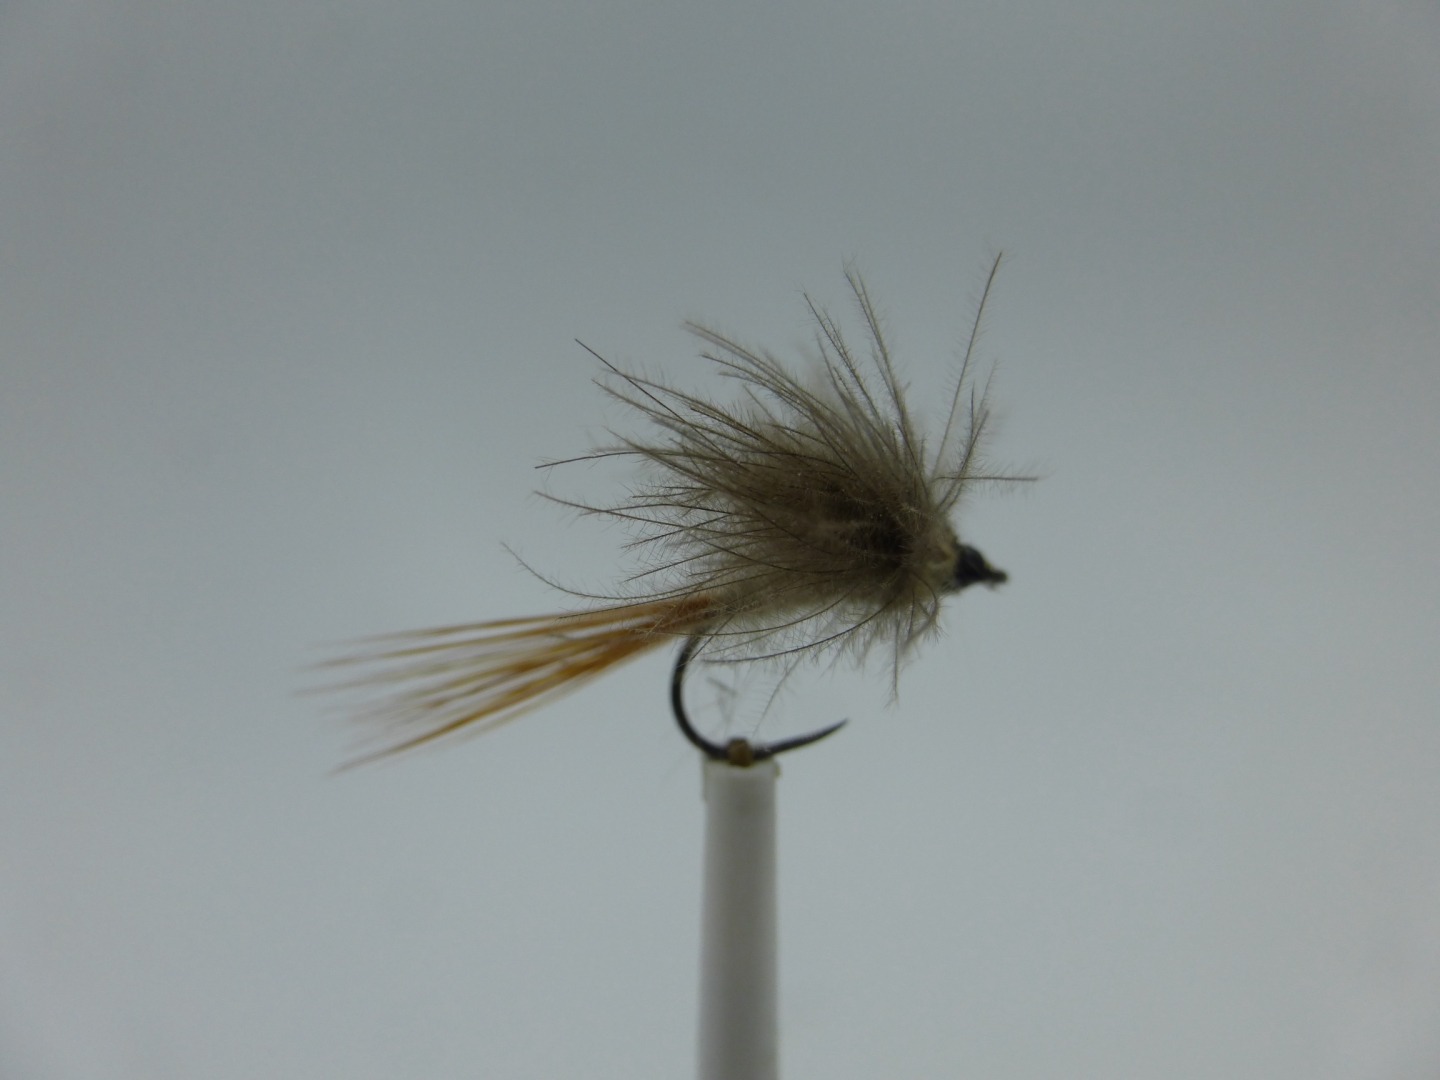 Size 16 CDC Mayfly Hare,s Ear Barbless